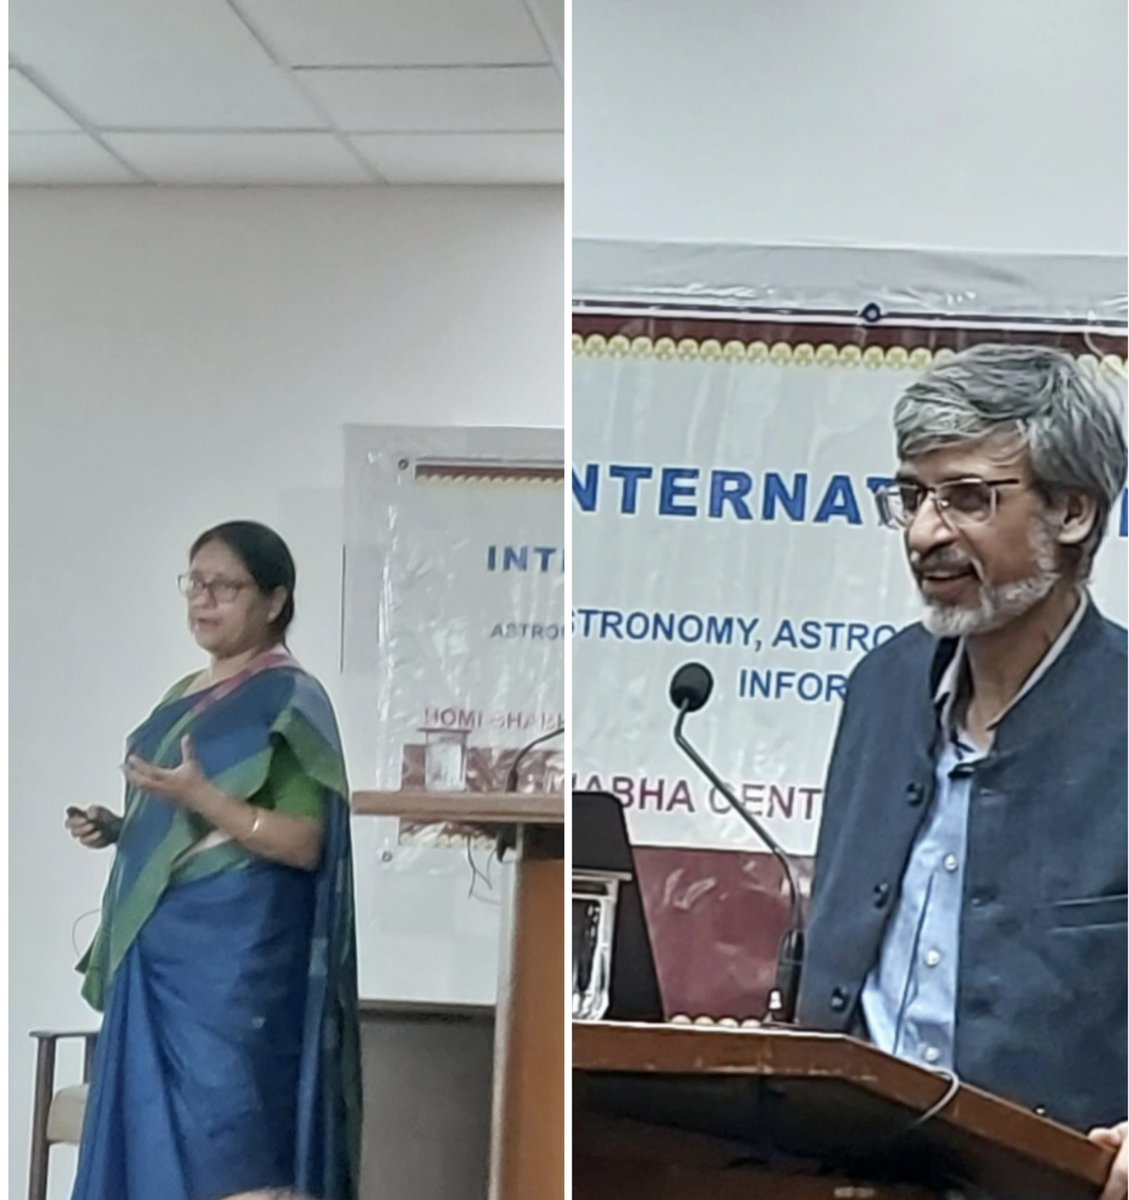 Followed by an ever-interesting talk on “Artificial Intelligence: An Overview and Applications in Healthcare” by Prof. Sanghamitra Bandyopadhyay @ISIKolkata (2).